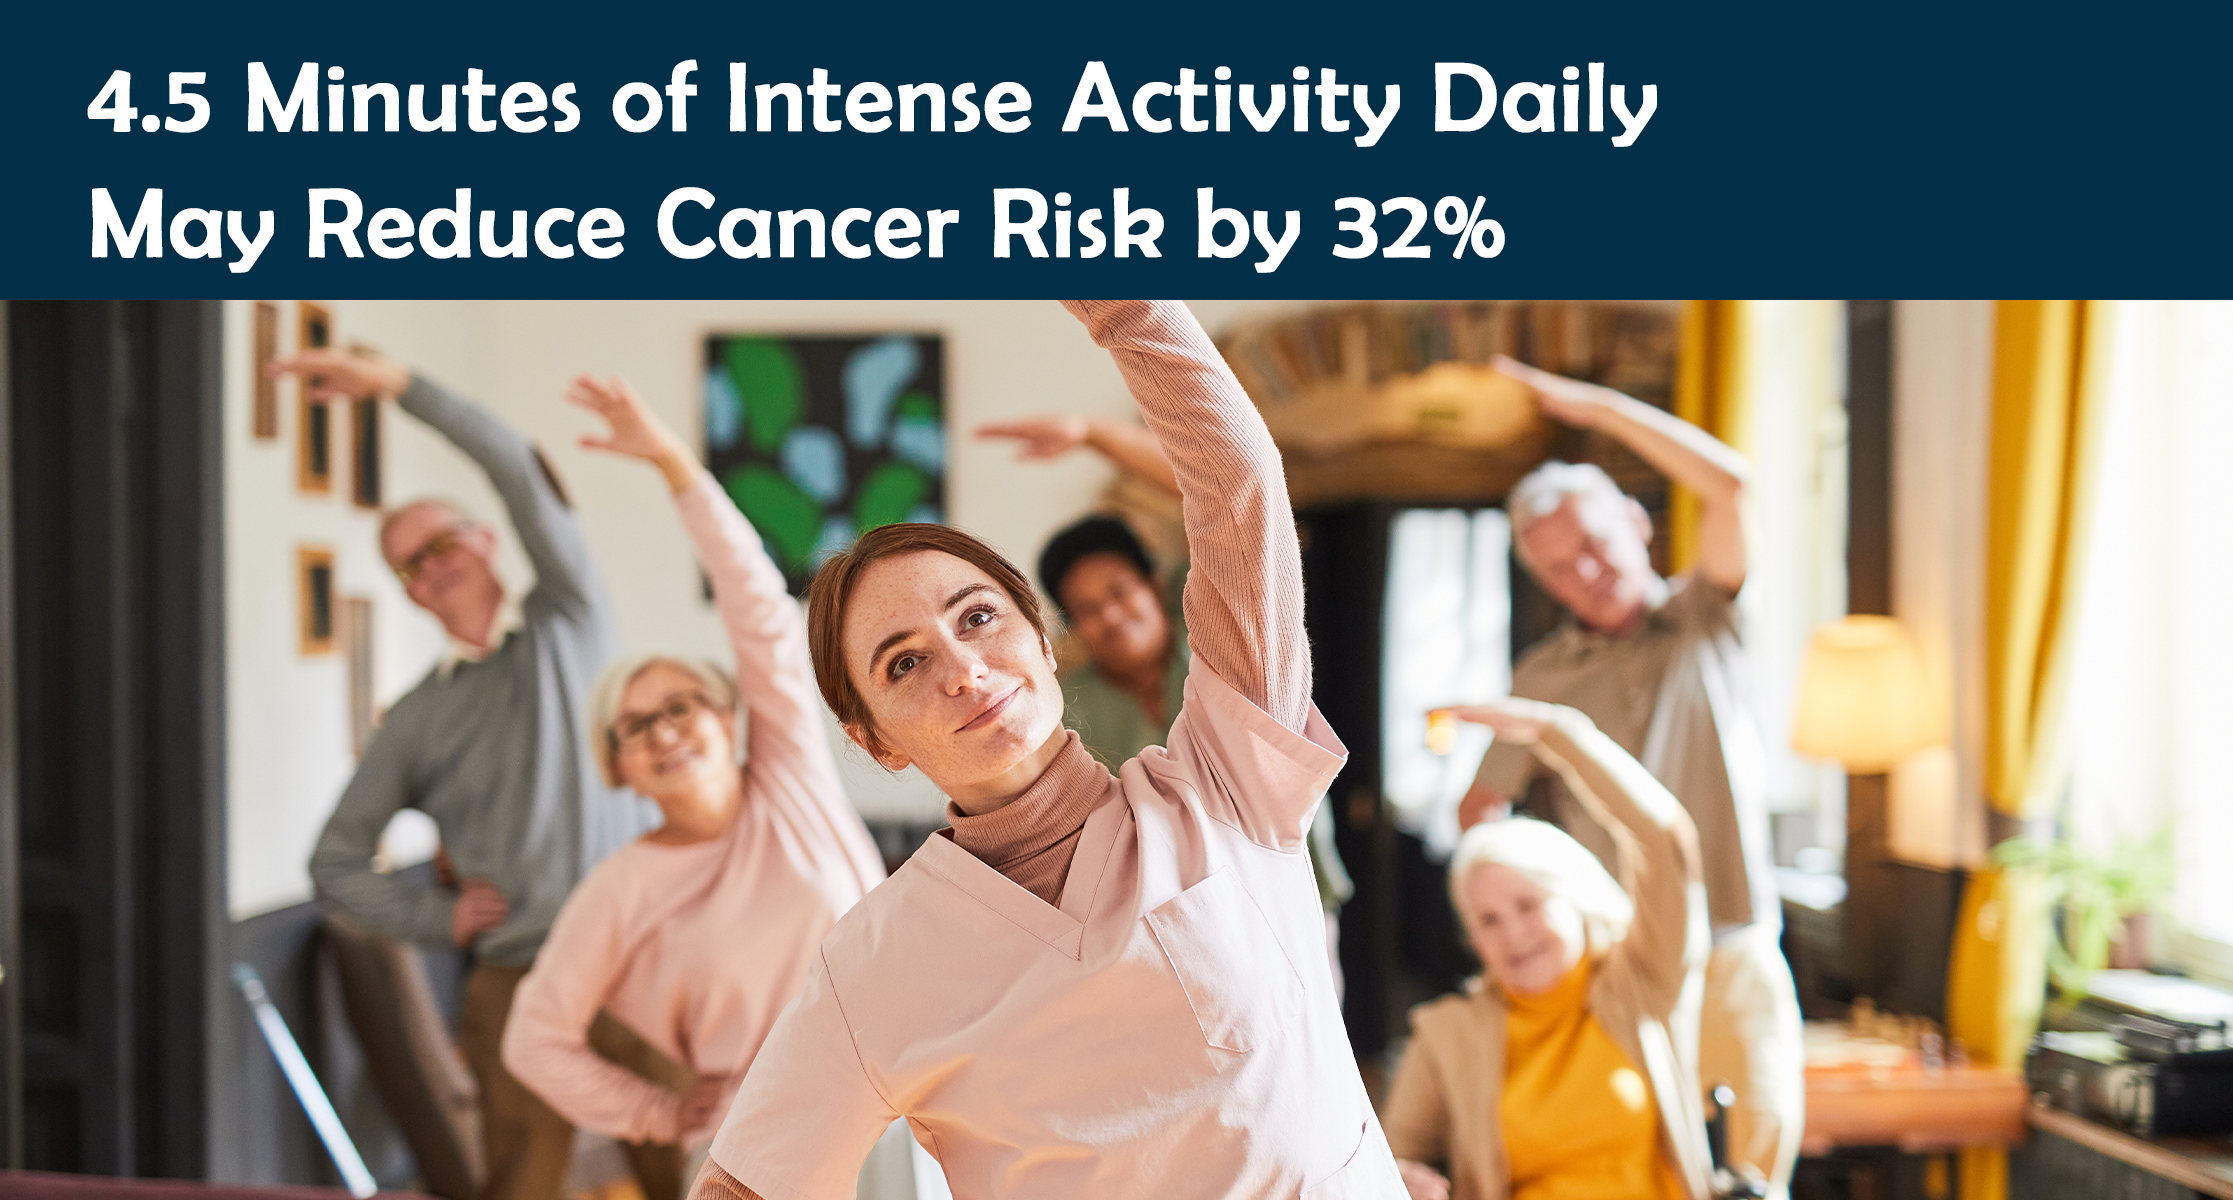 4.5 Minutes of Intense Activity Daily May Reduce Cancer Risk by 32%